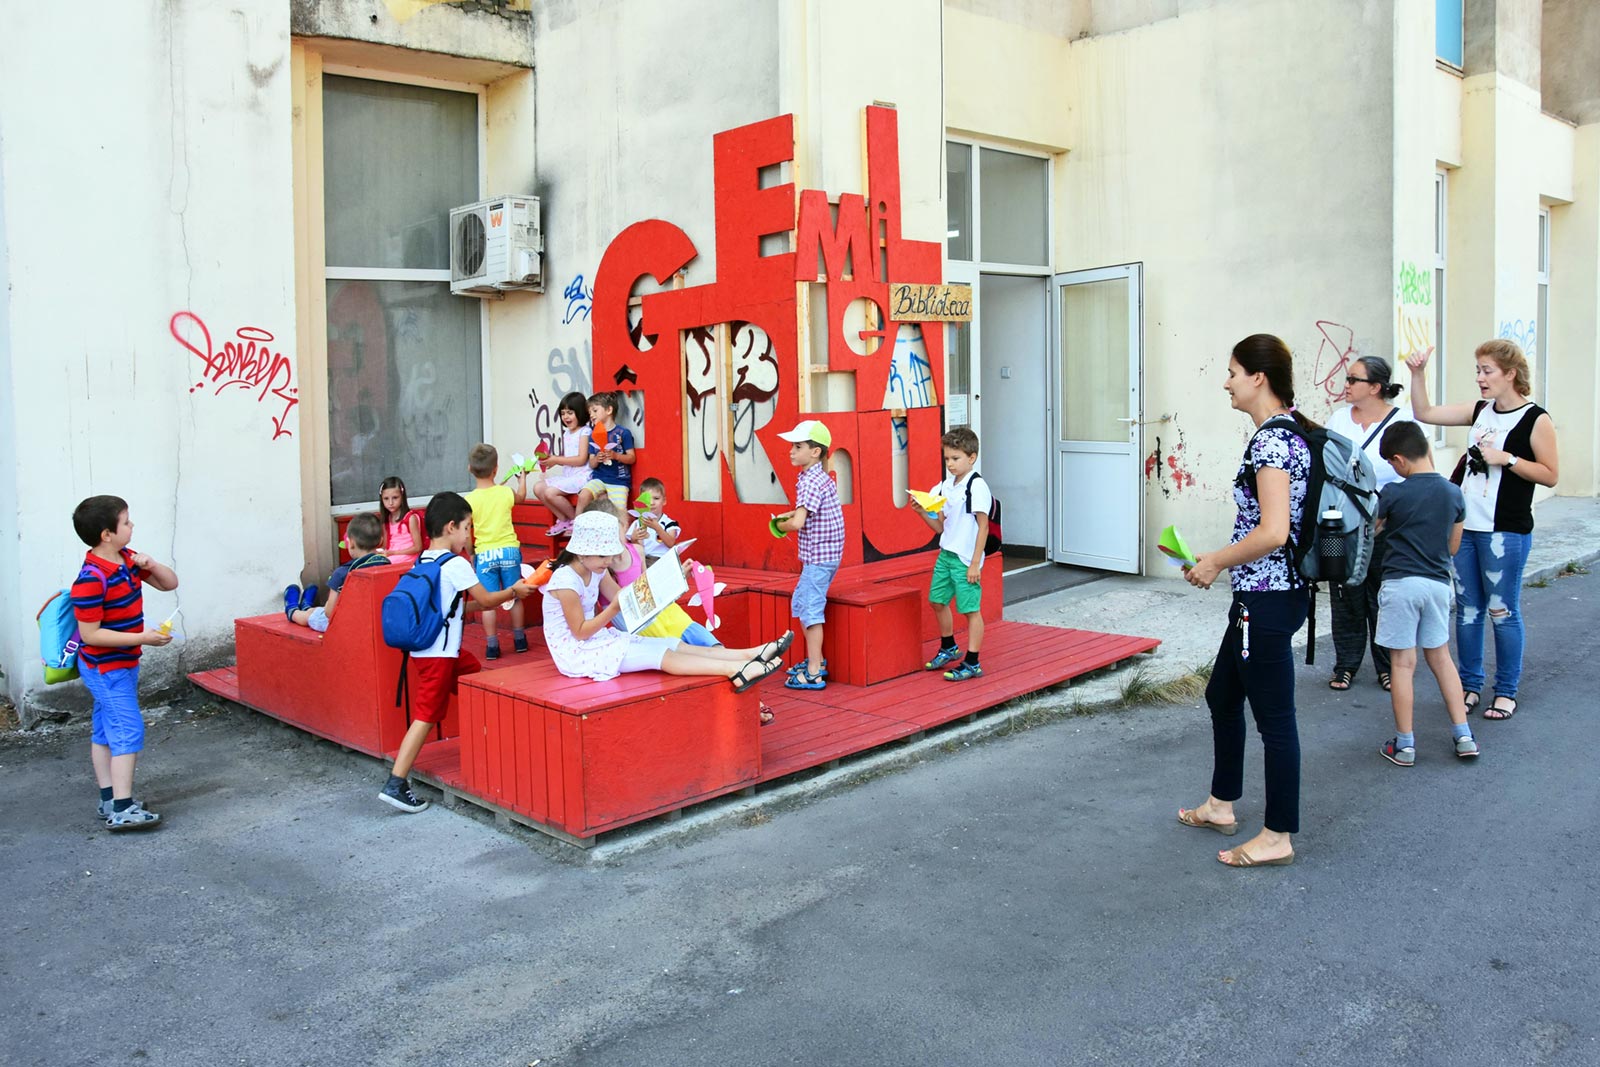 Participatory intervention developed in partnership with Bucharest Metropolitan Library within “Urban Spaces in Action” project, coordinated by Komunitas Association. Image Credit: Bucharest Metropolitan Library, Bucharest 2016